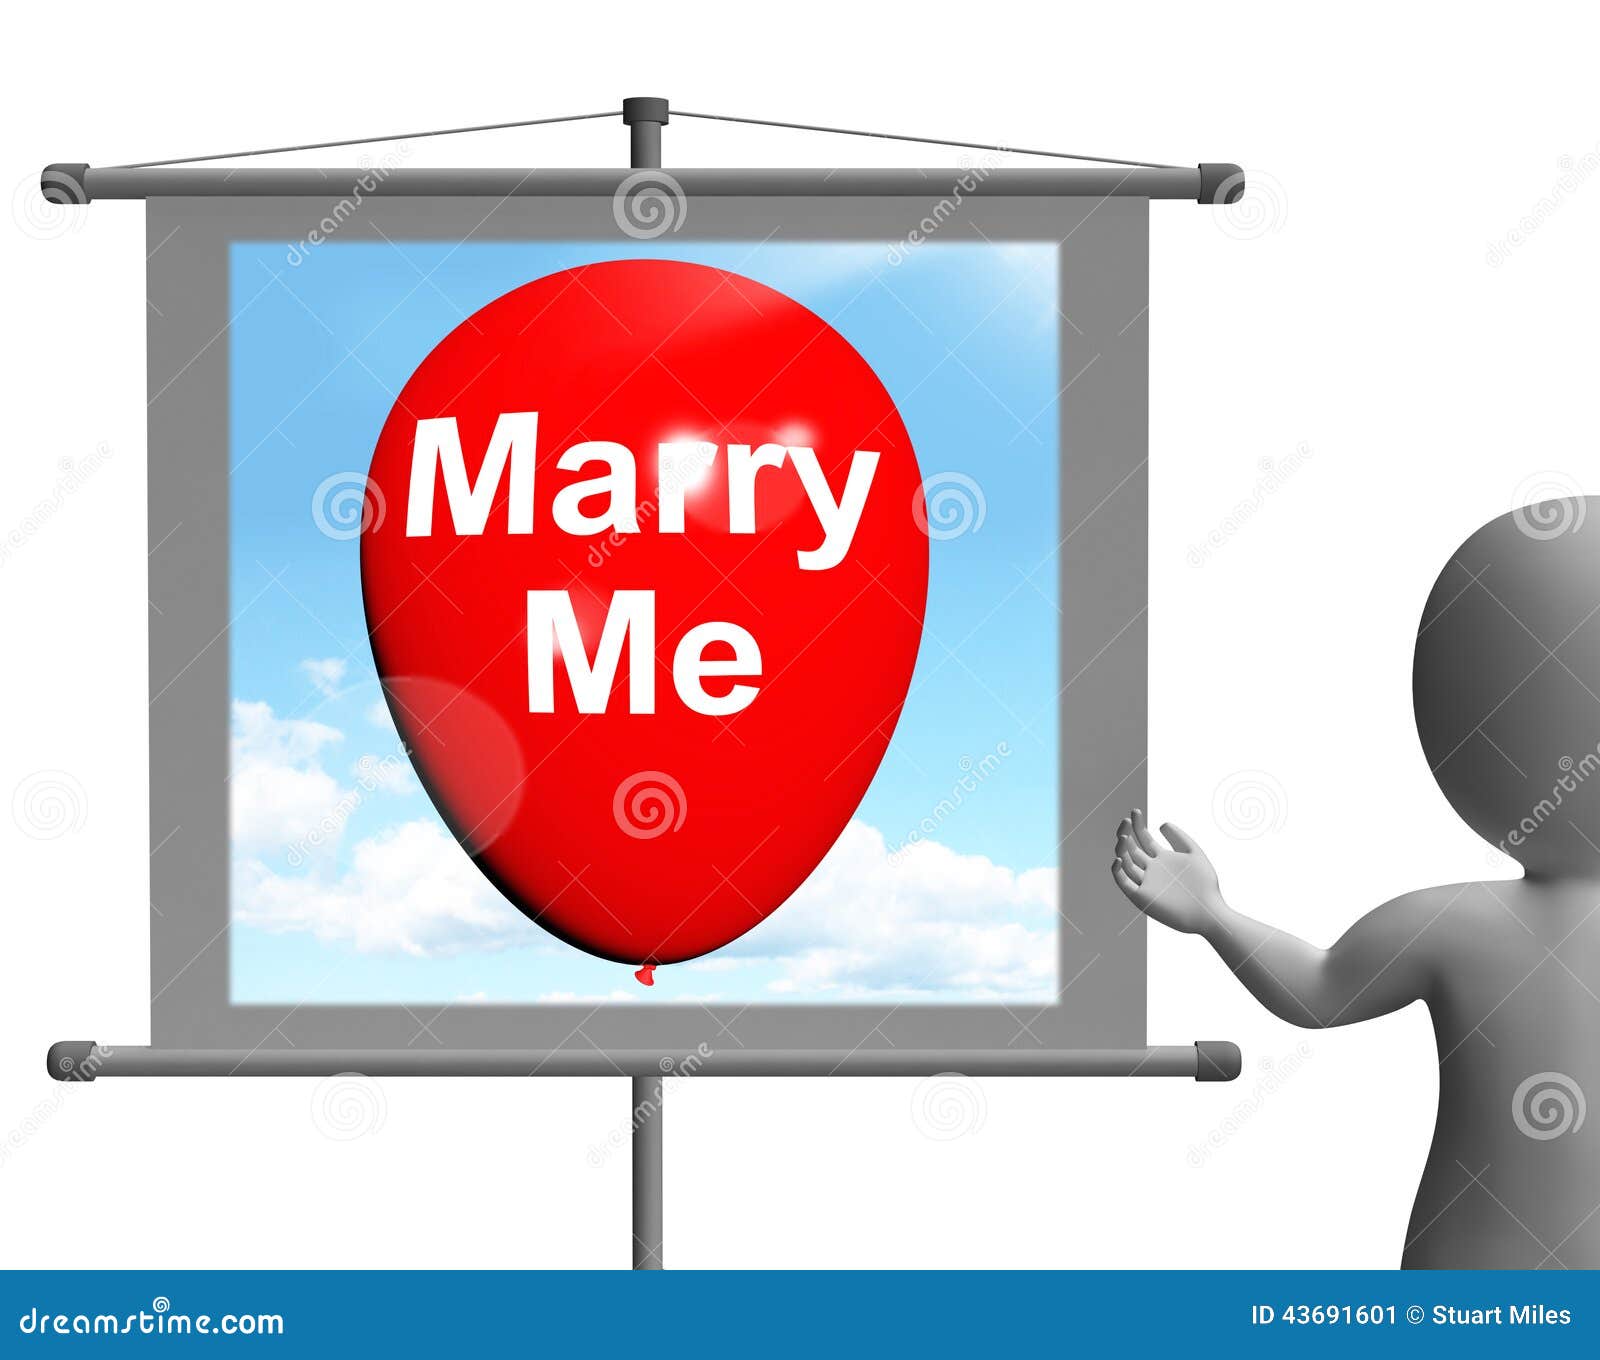 marry me sign represents lovers proposed engagement